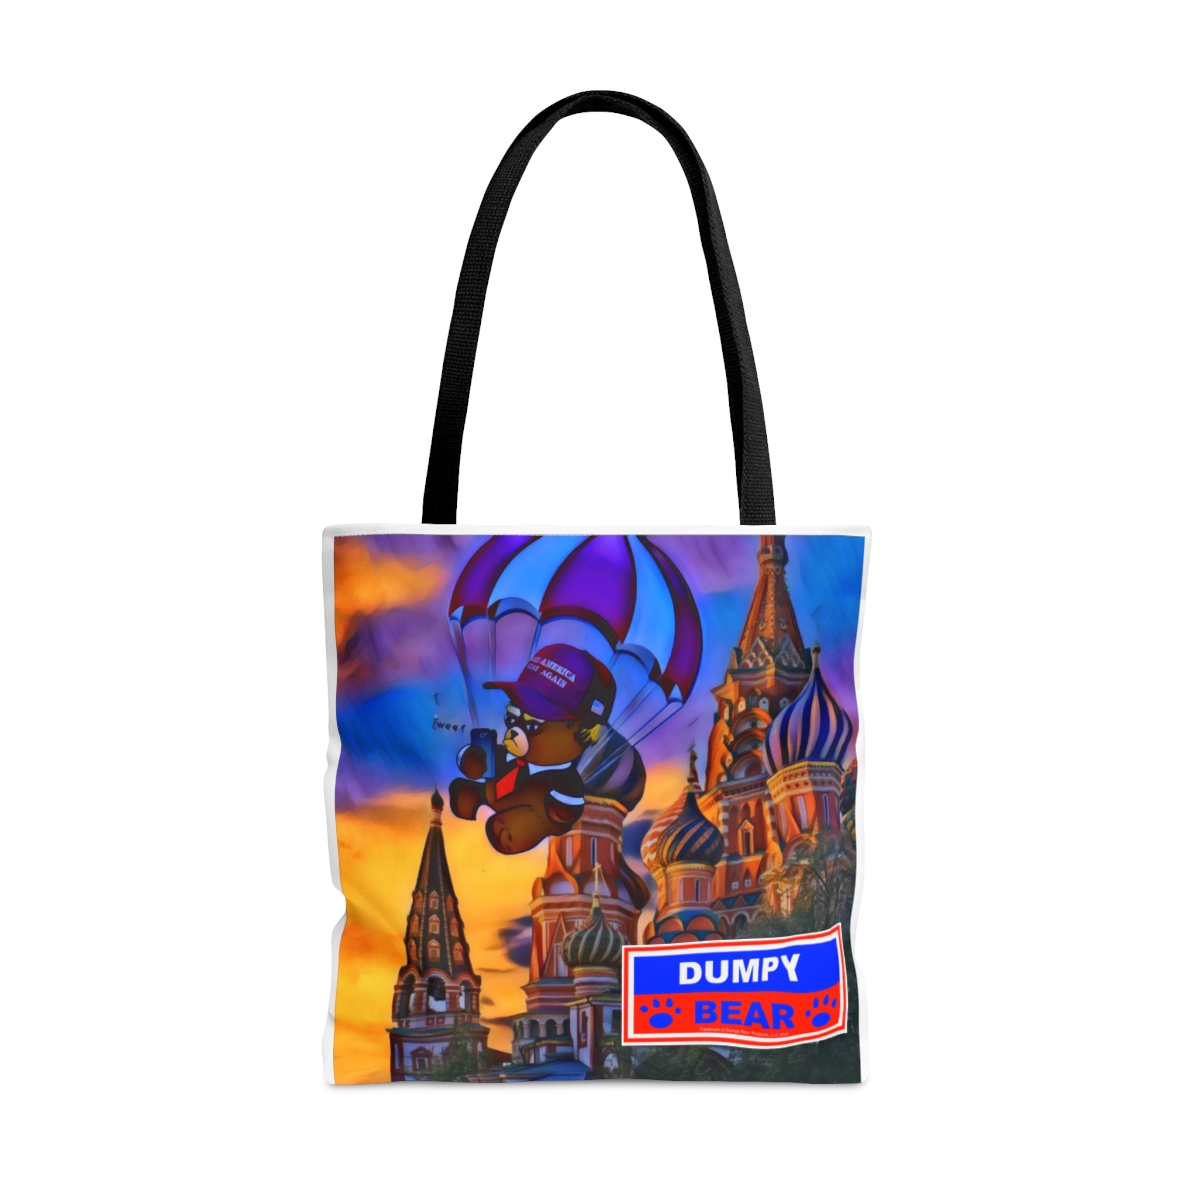 Dumpy Bear Goes to Russia - Tote Bag (AOP) product thumbnail image